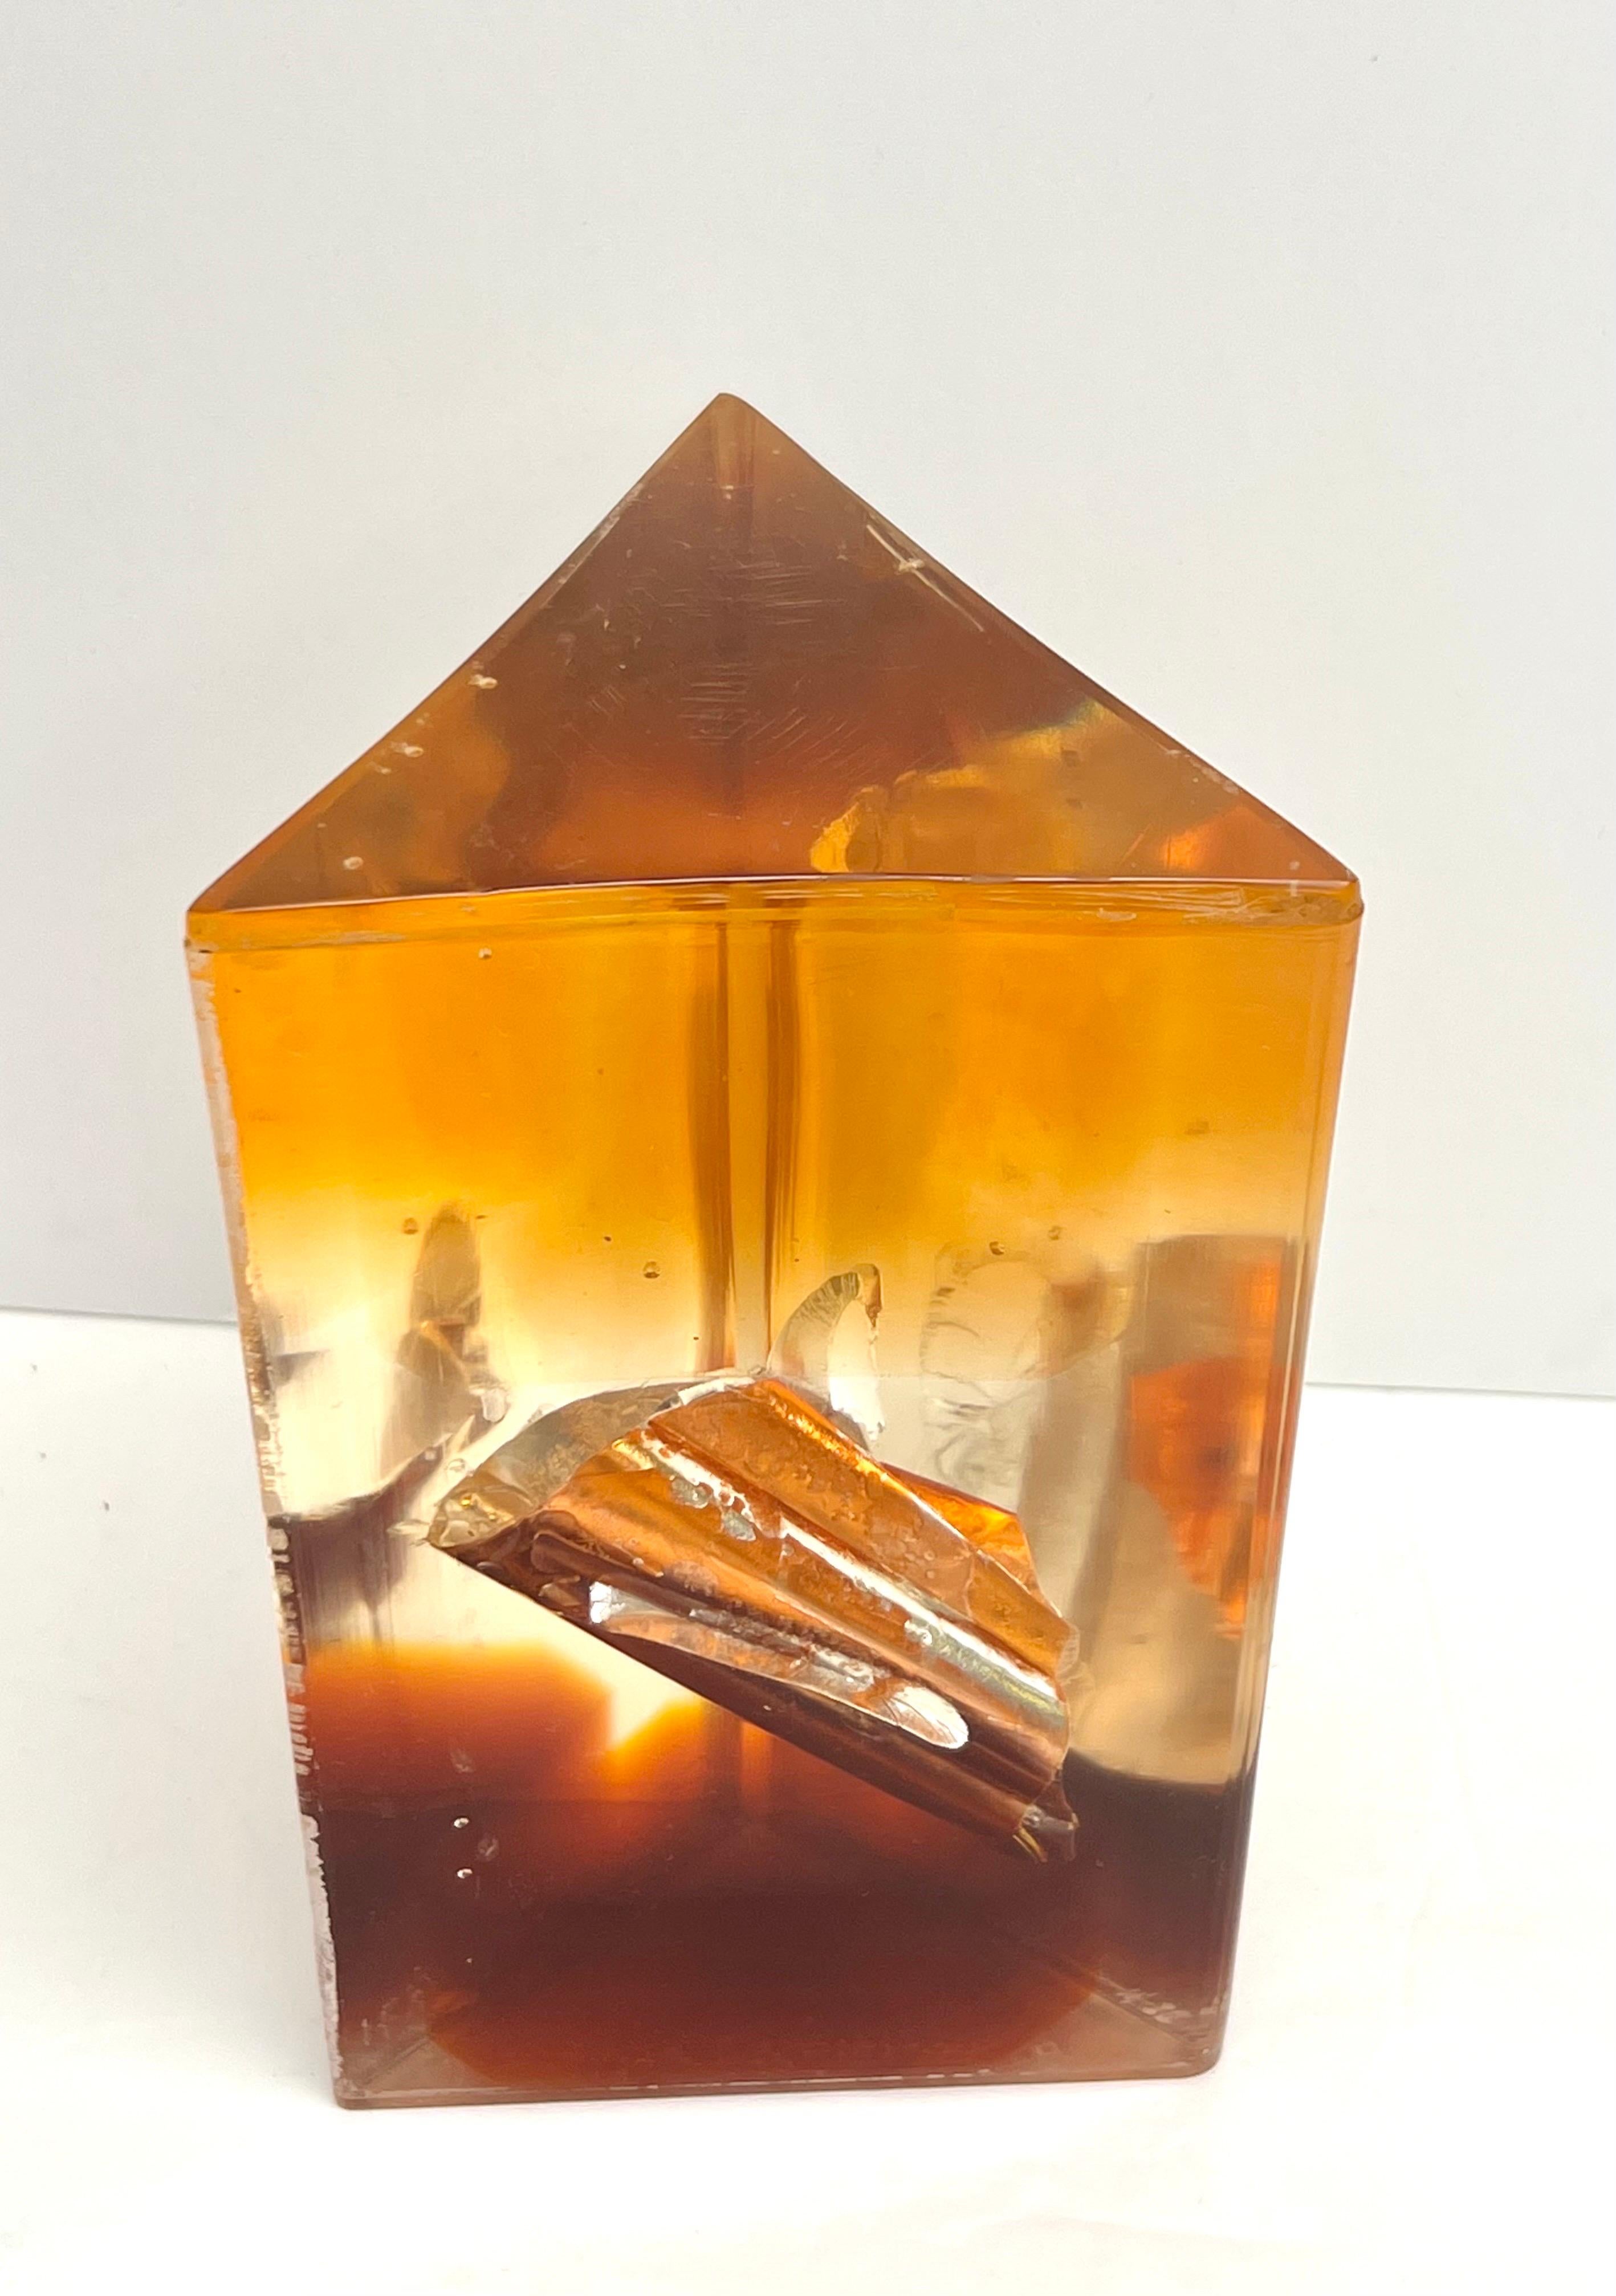 Mexican Feliciano Bejar Resin Lucite Abstract Modern Sculpture